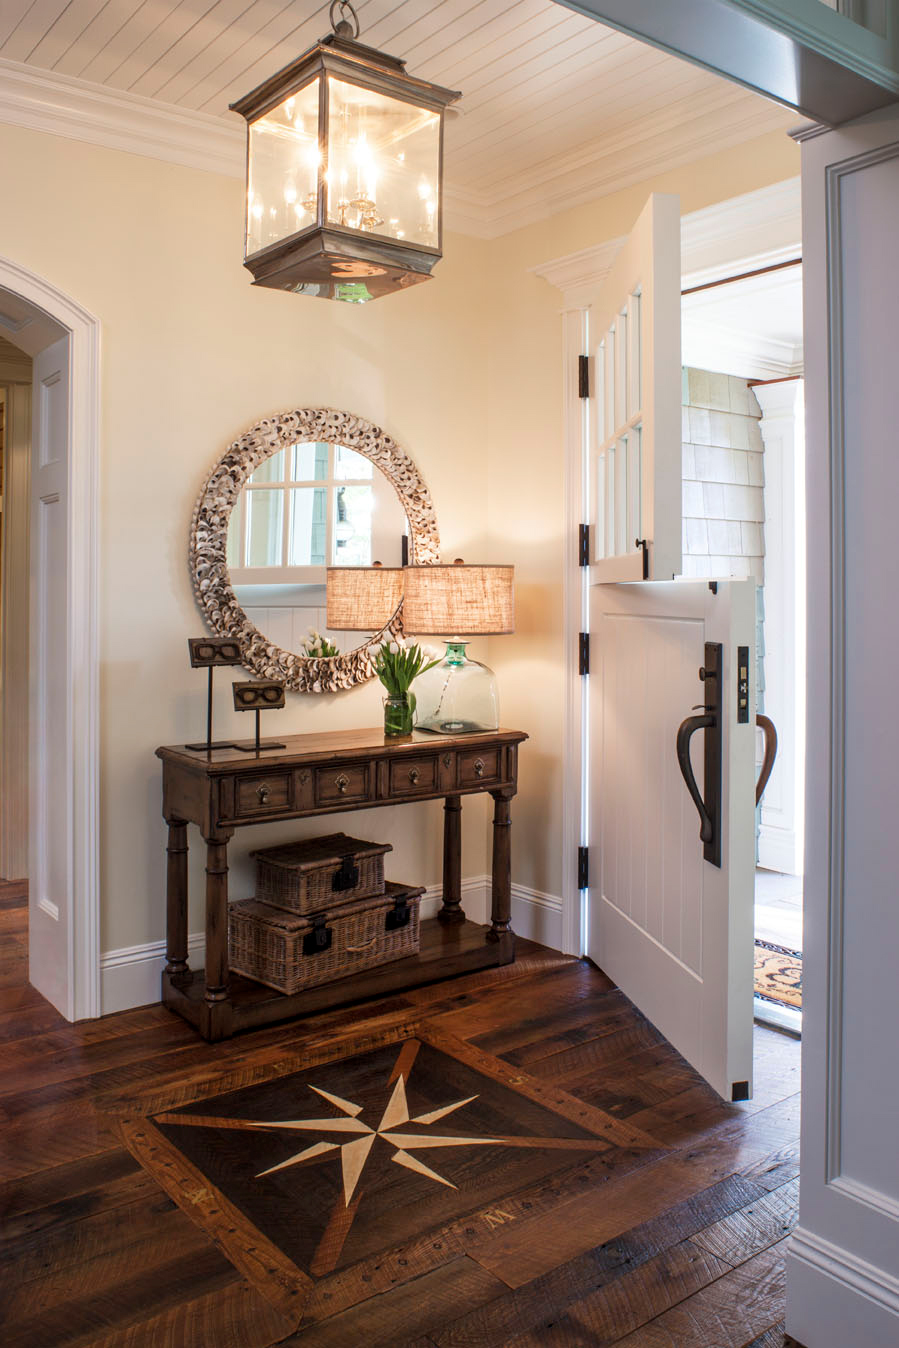 Maximize on space and place the decor elements behind the front door